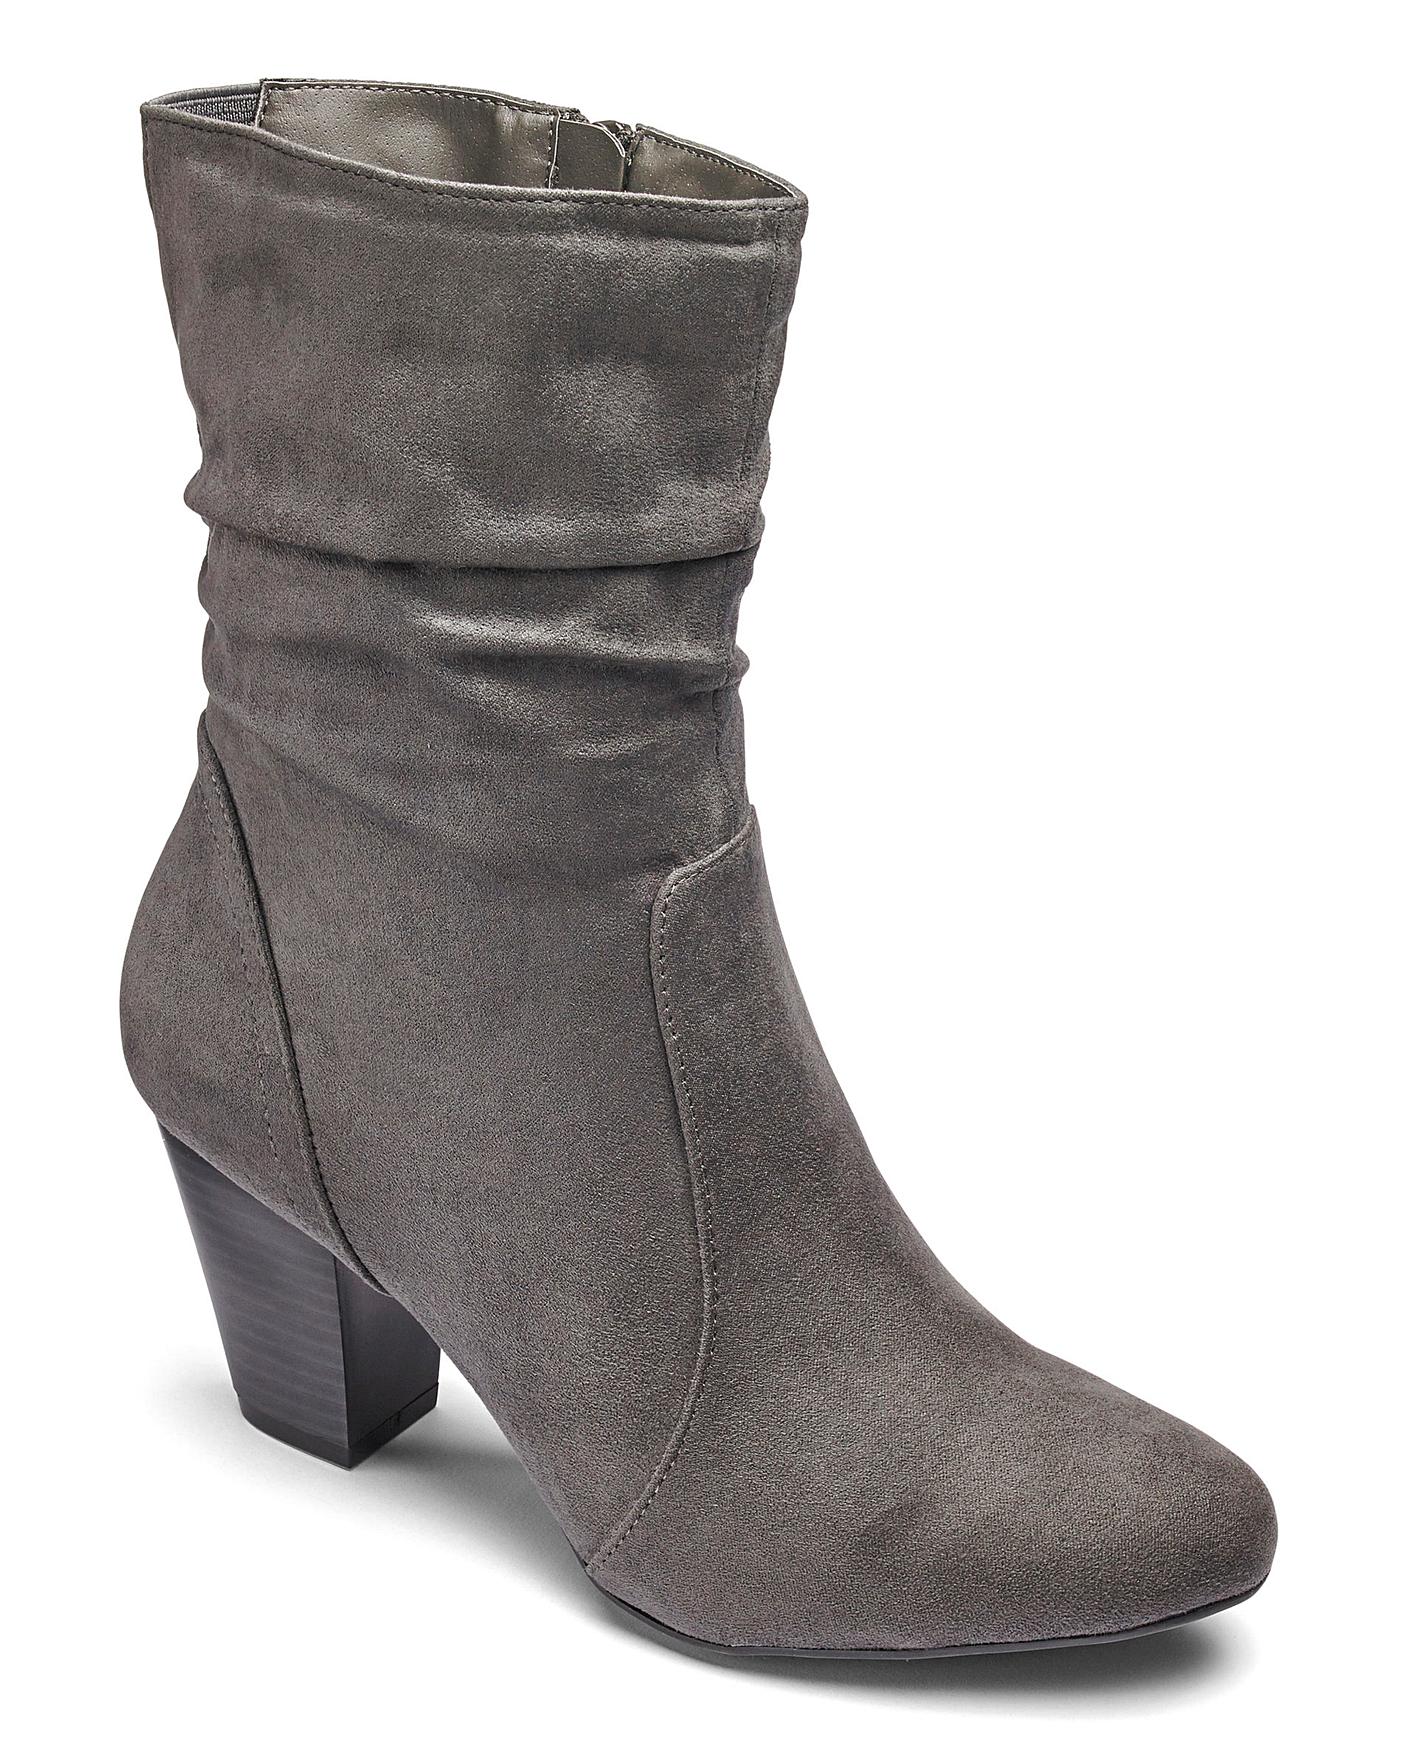 dune ronni boots